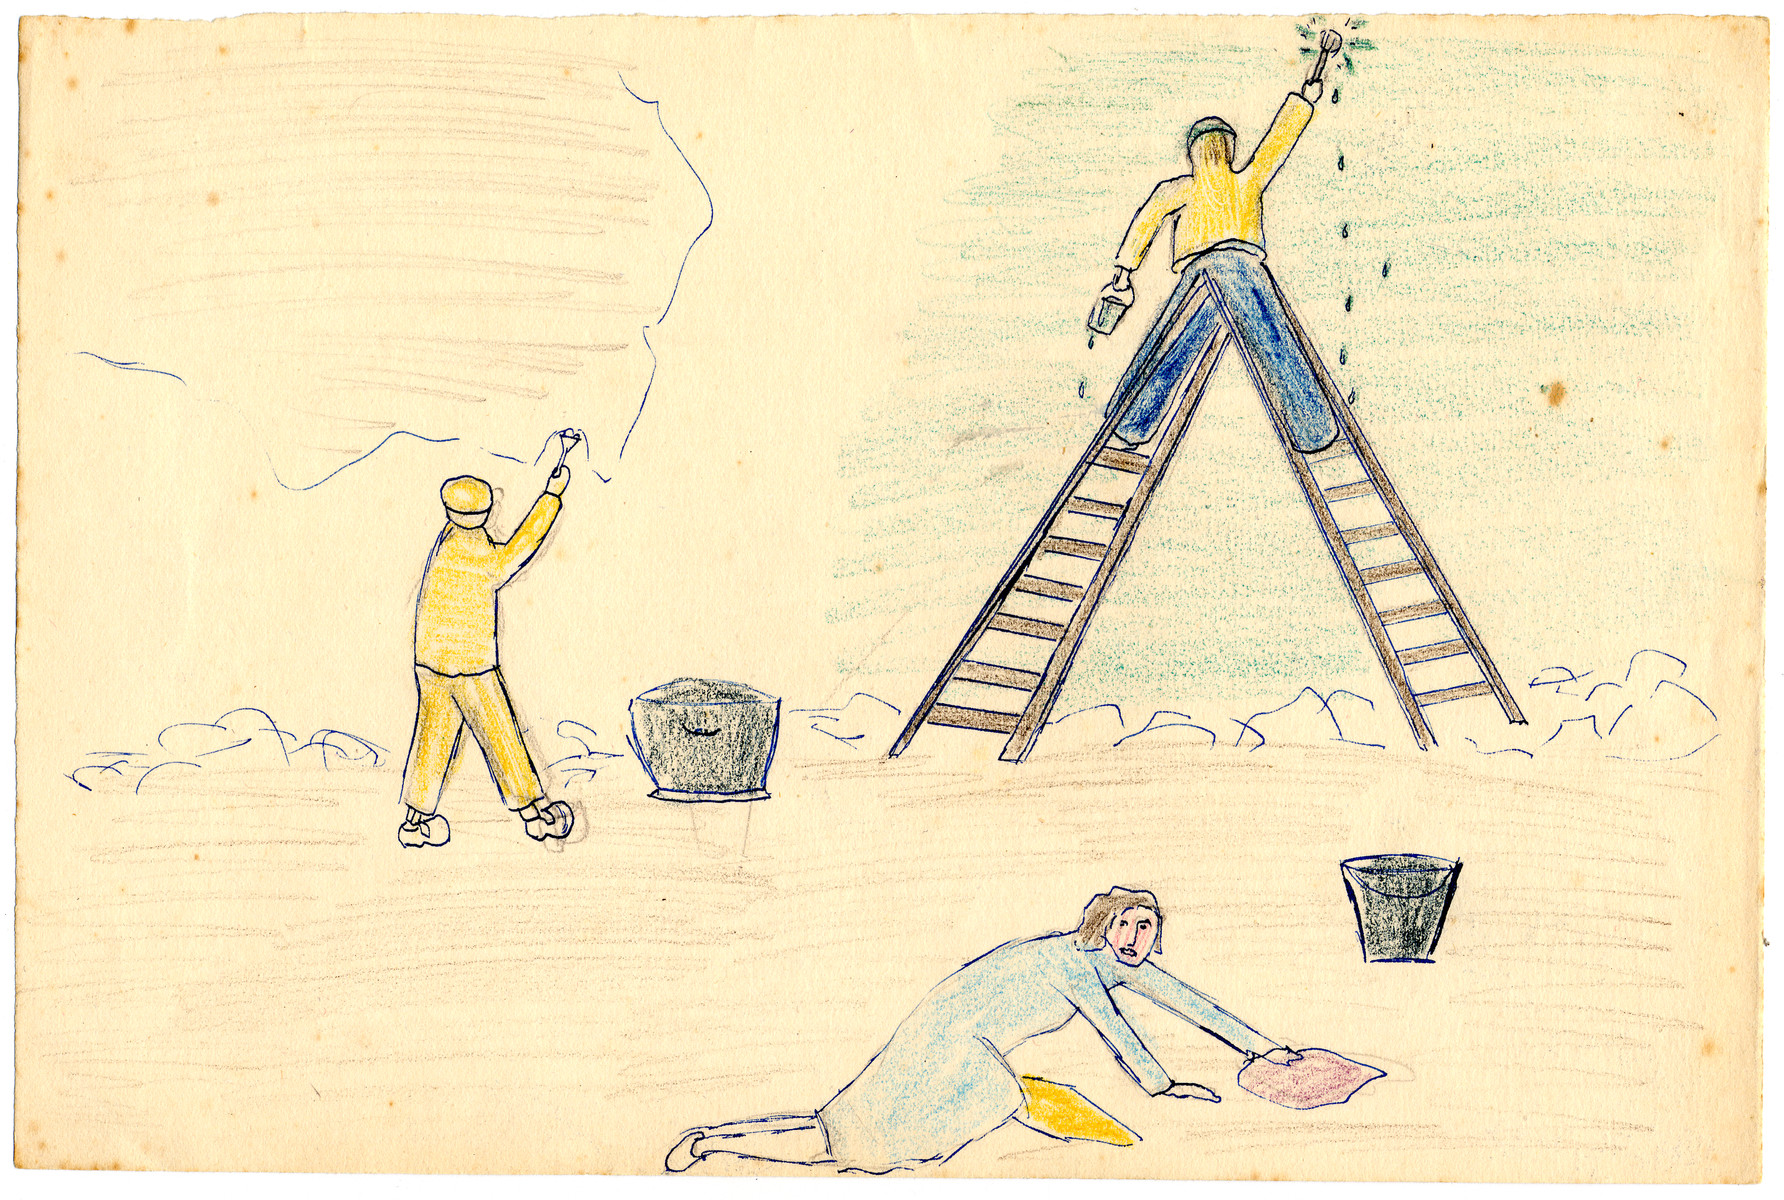 A child's drawing of adults performing housework in Chateau de la Hille.